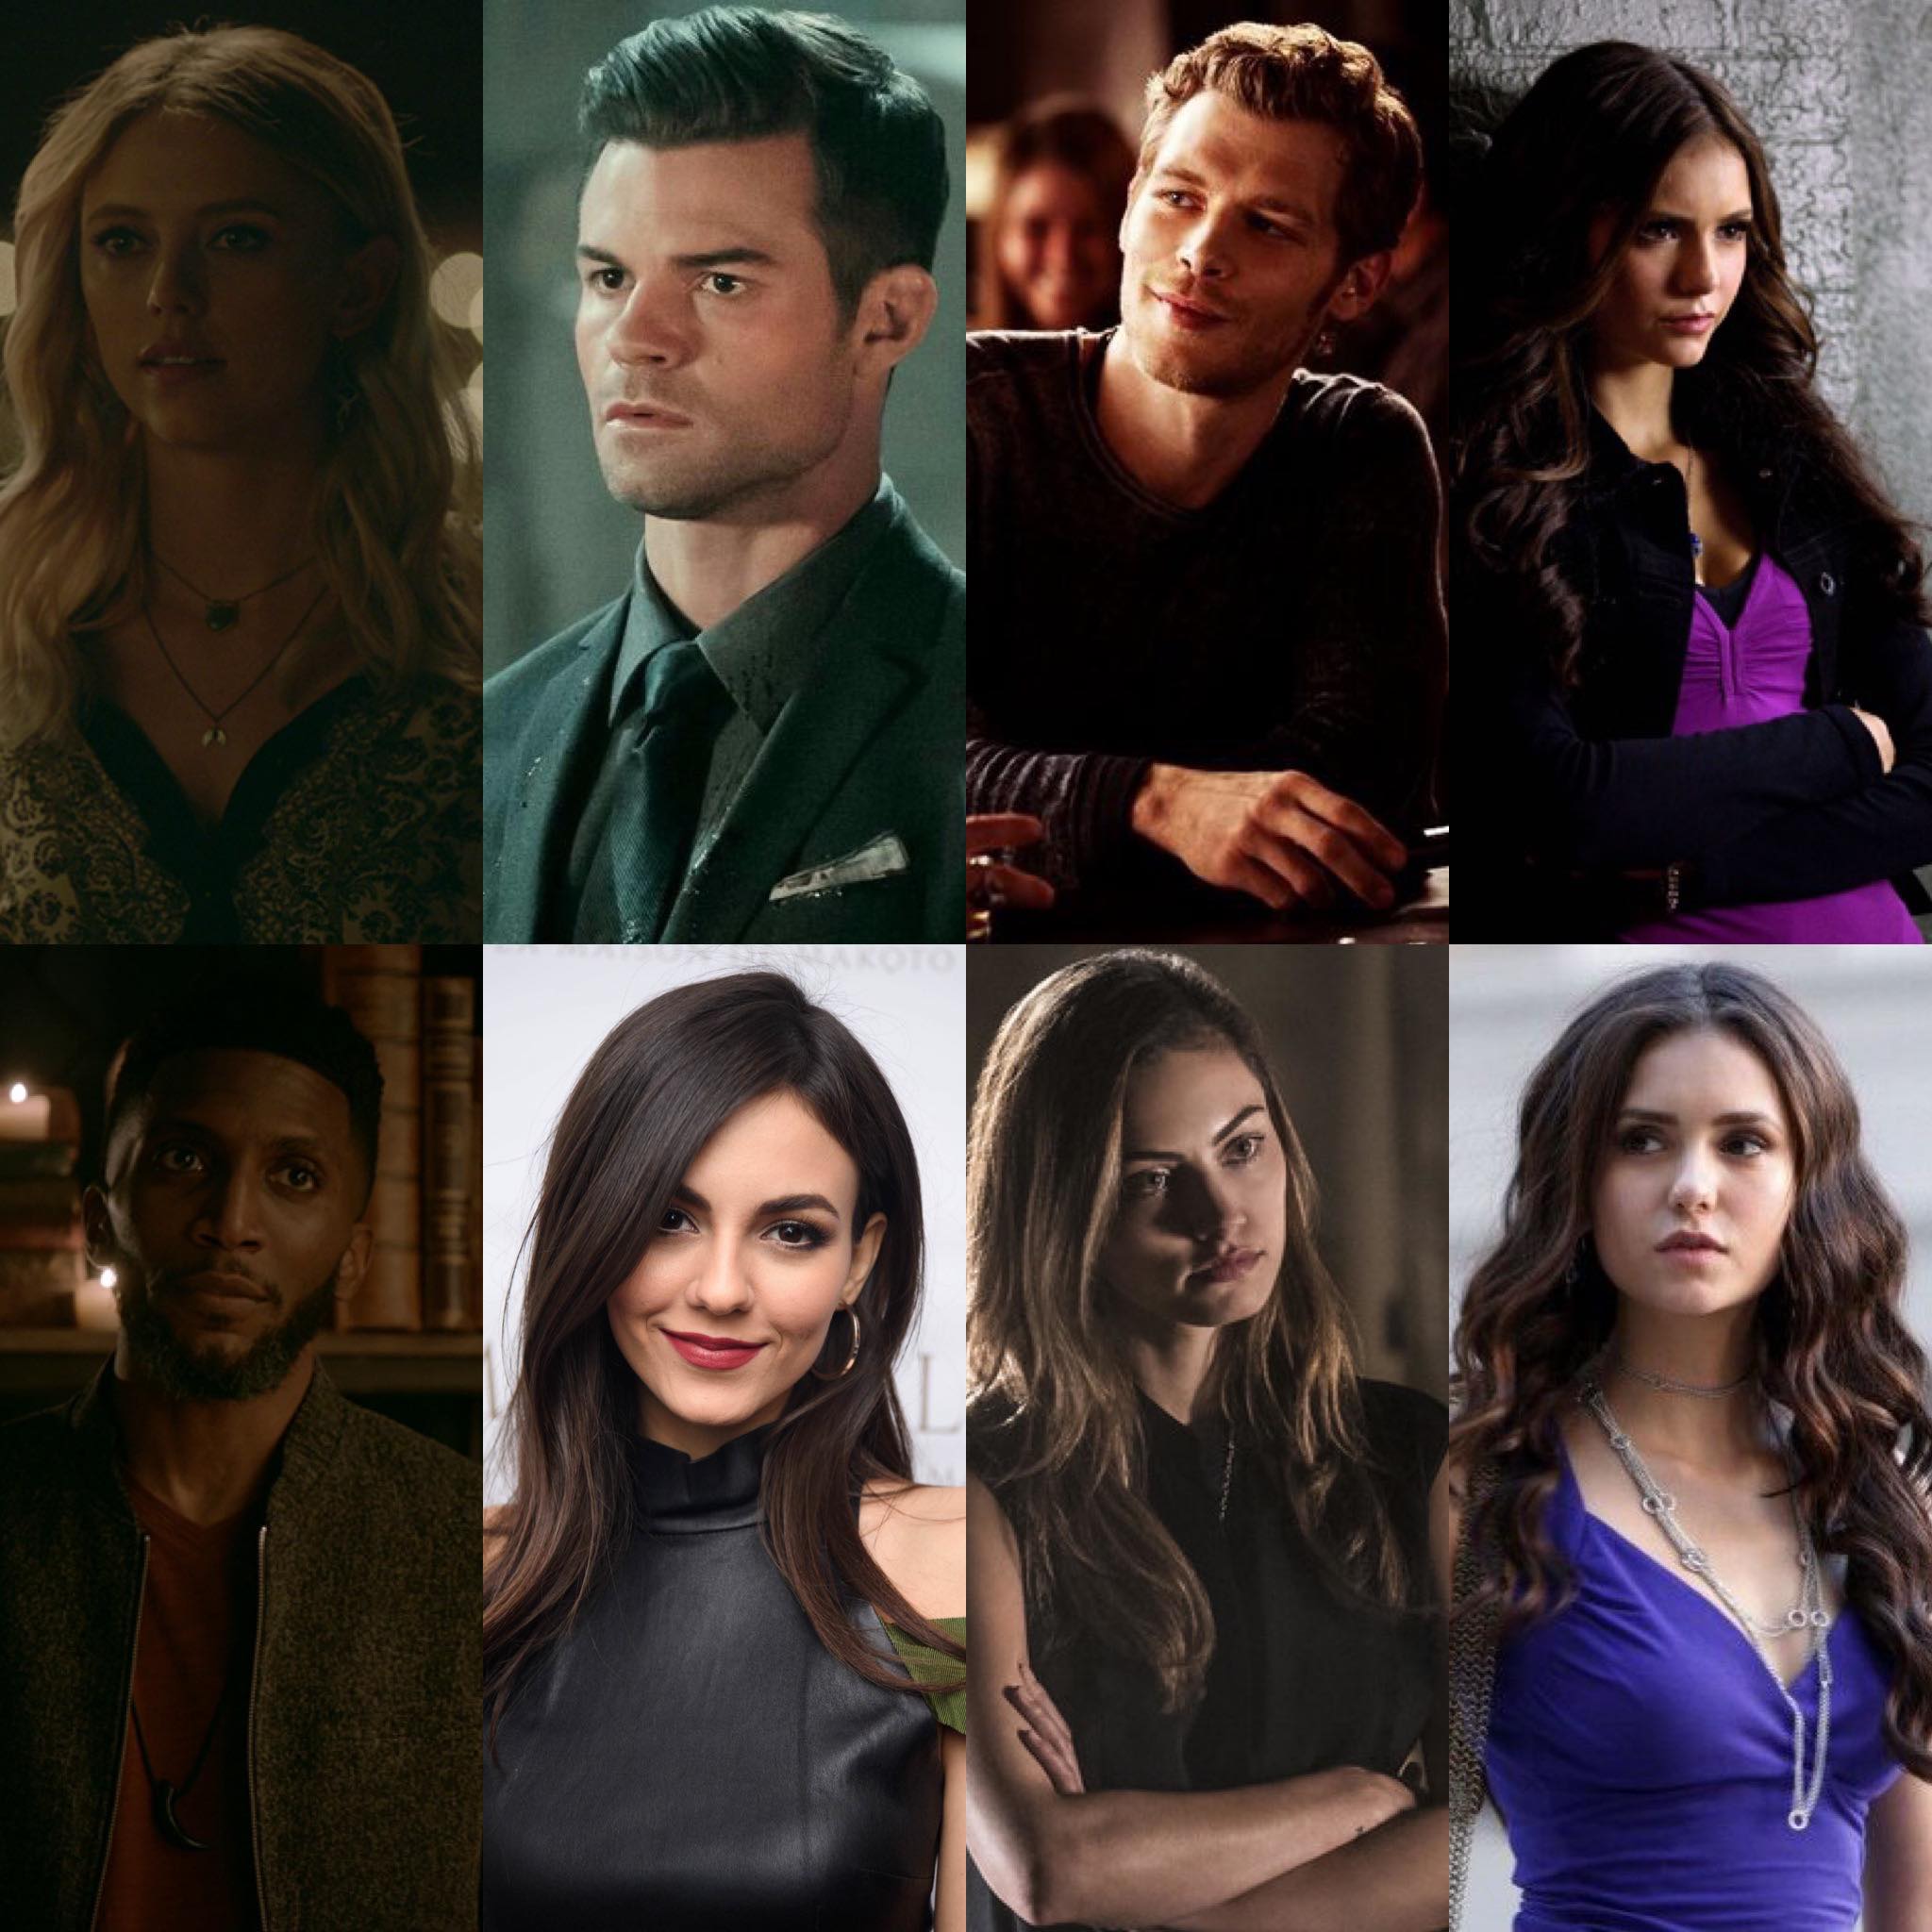 New Orleans Group, The Vampire Diaries Wiki